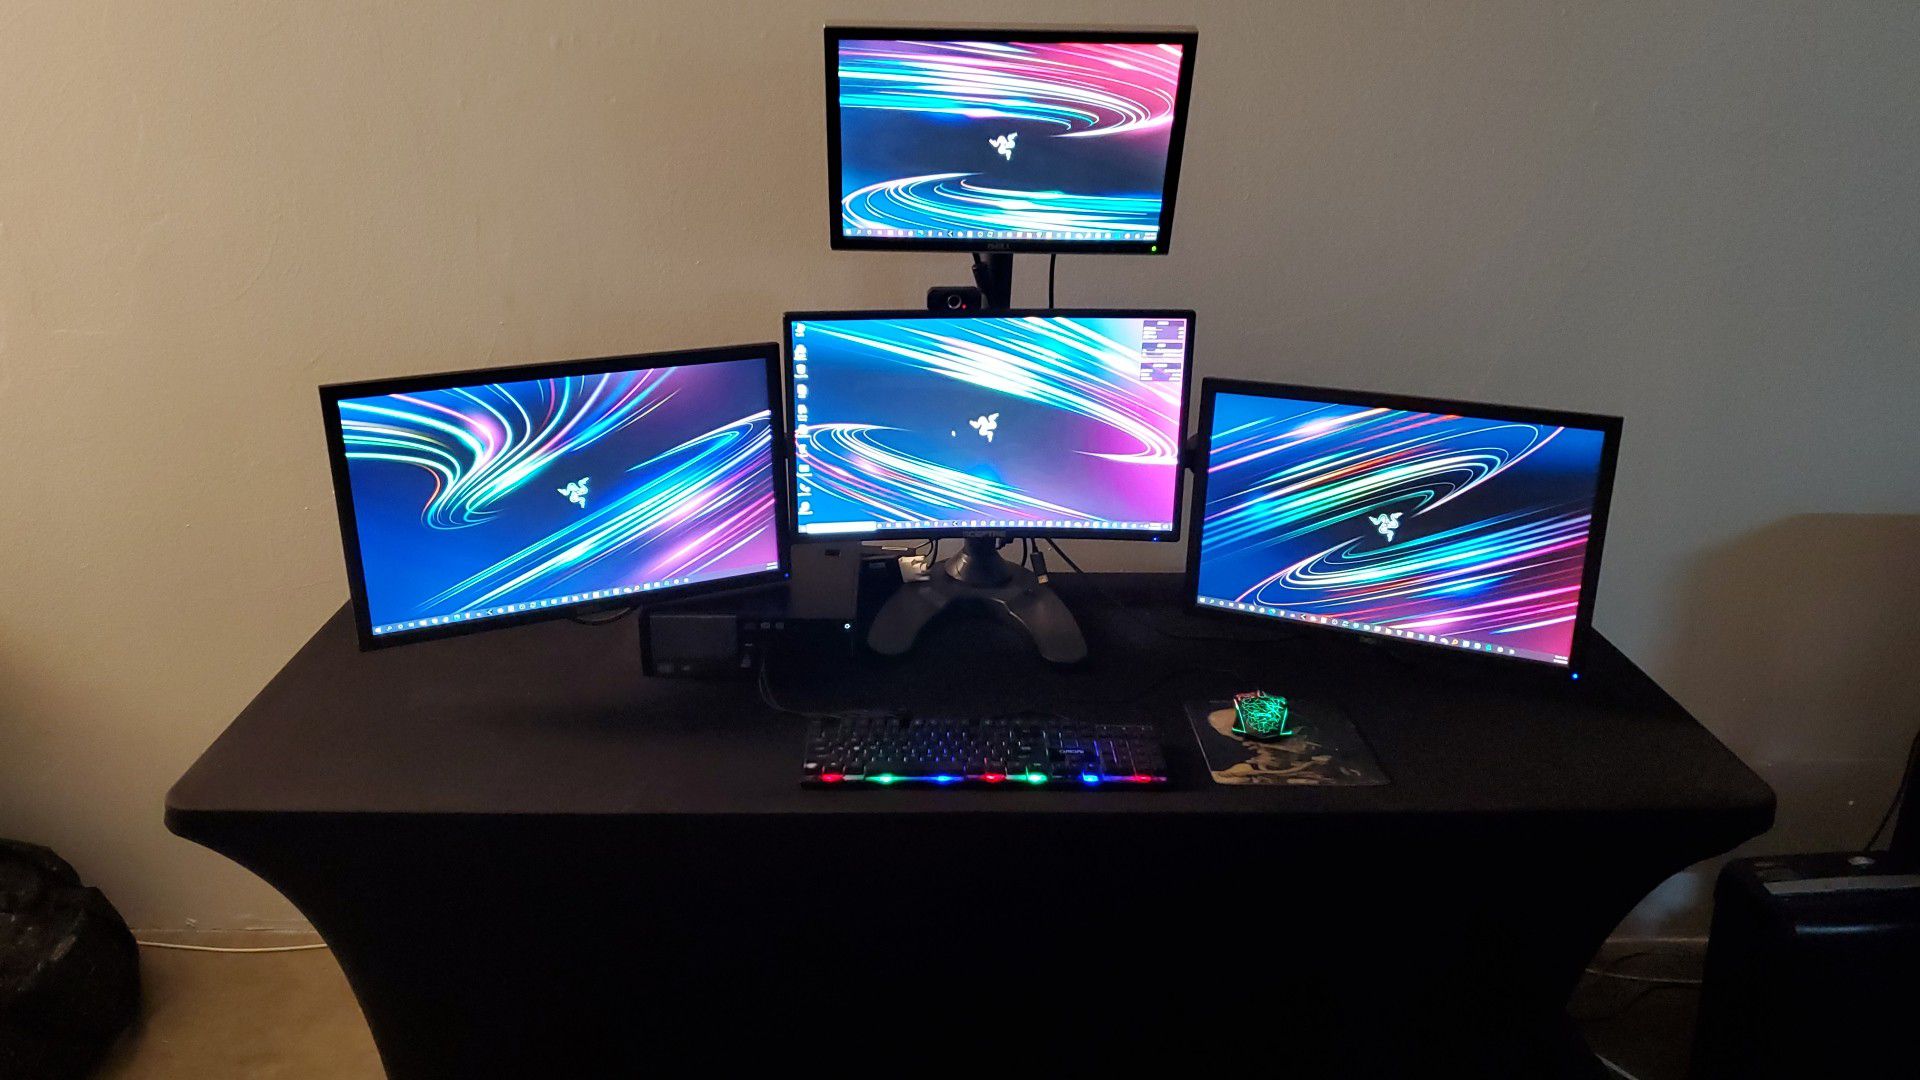 Quad screen desktop computer with table and gaming chair